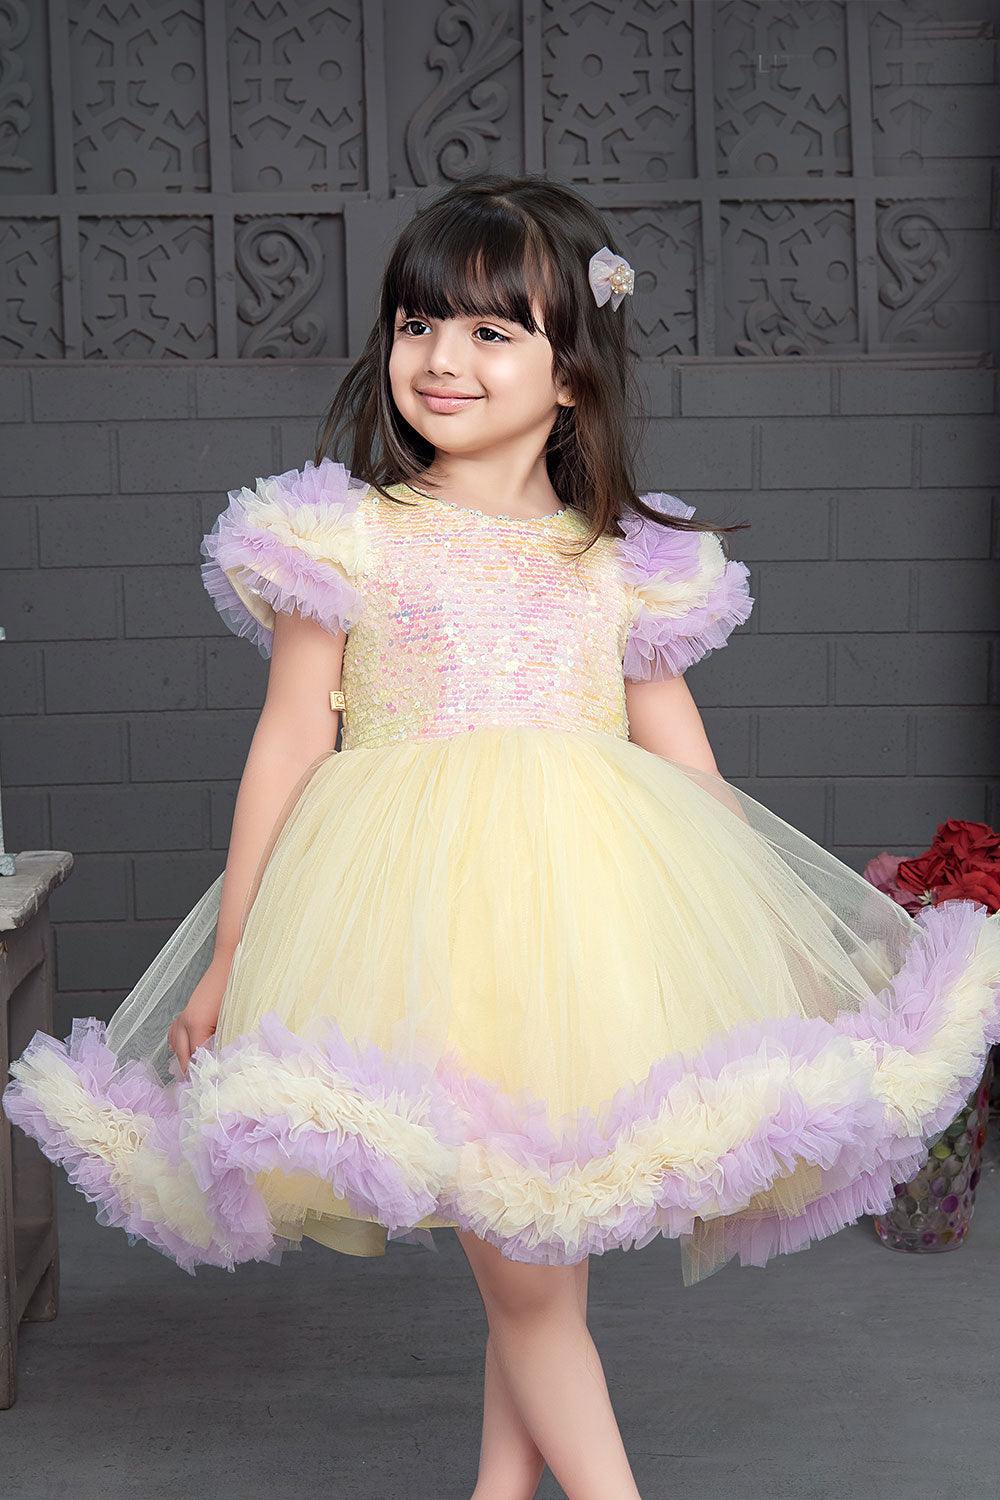 Pastel Harmony: Yellow and Lavender Ruffle Frock for Kids. - Lagorii Kids